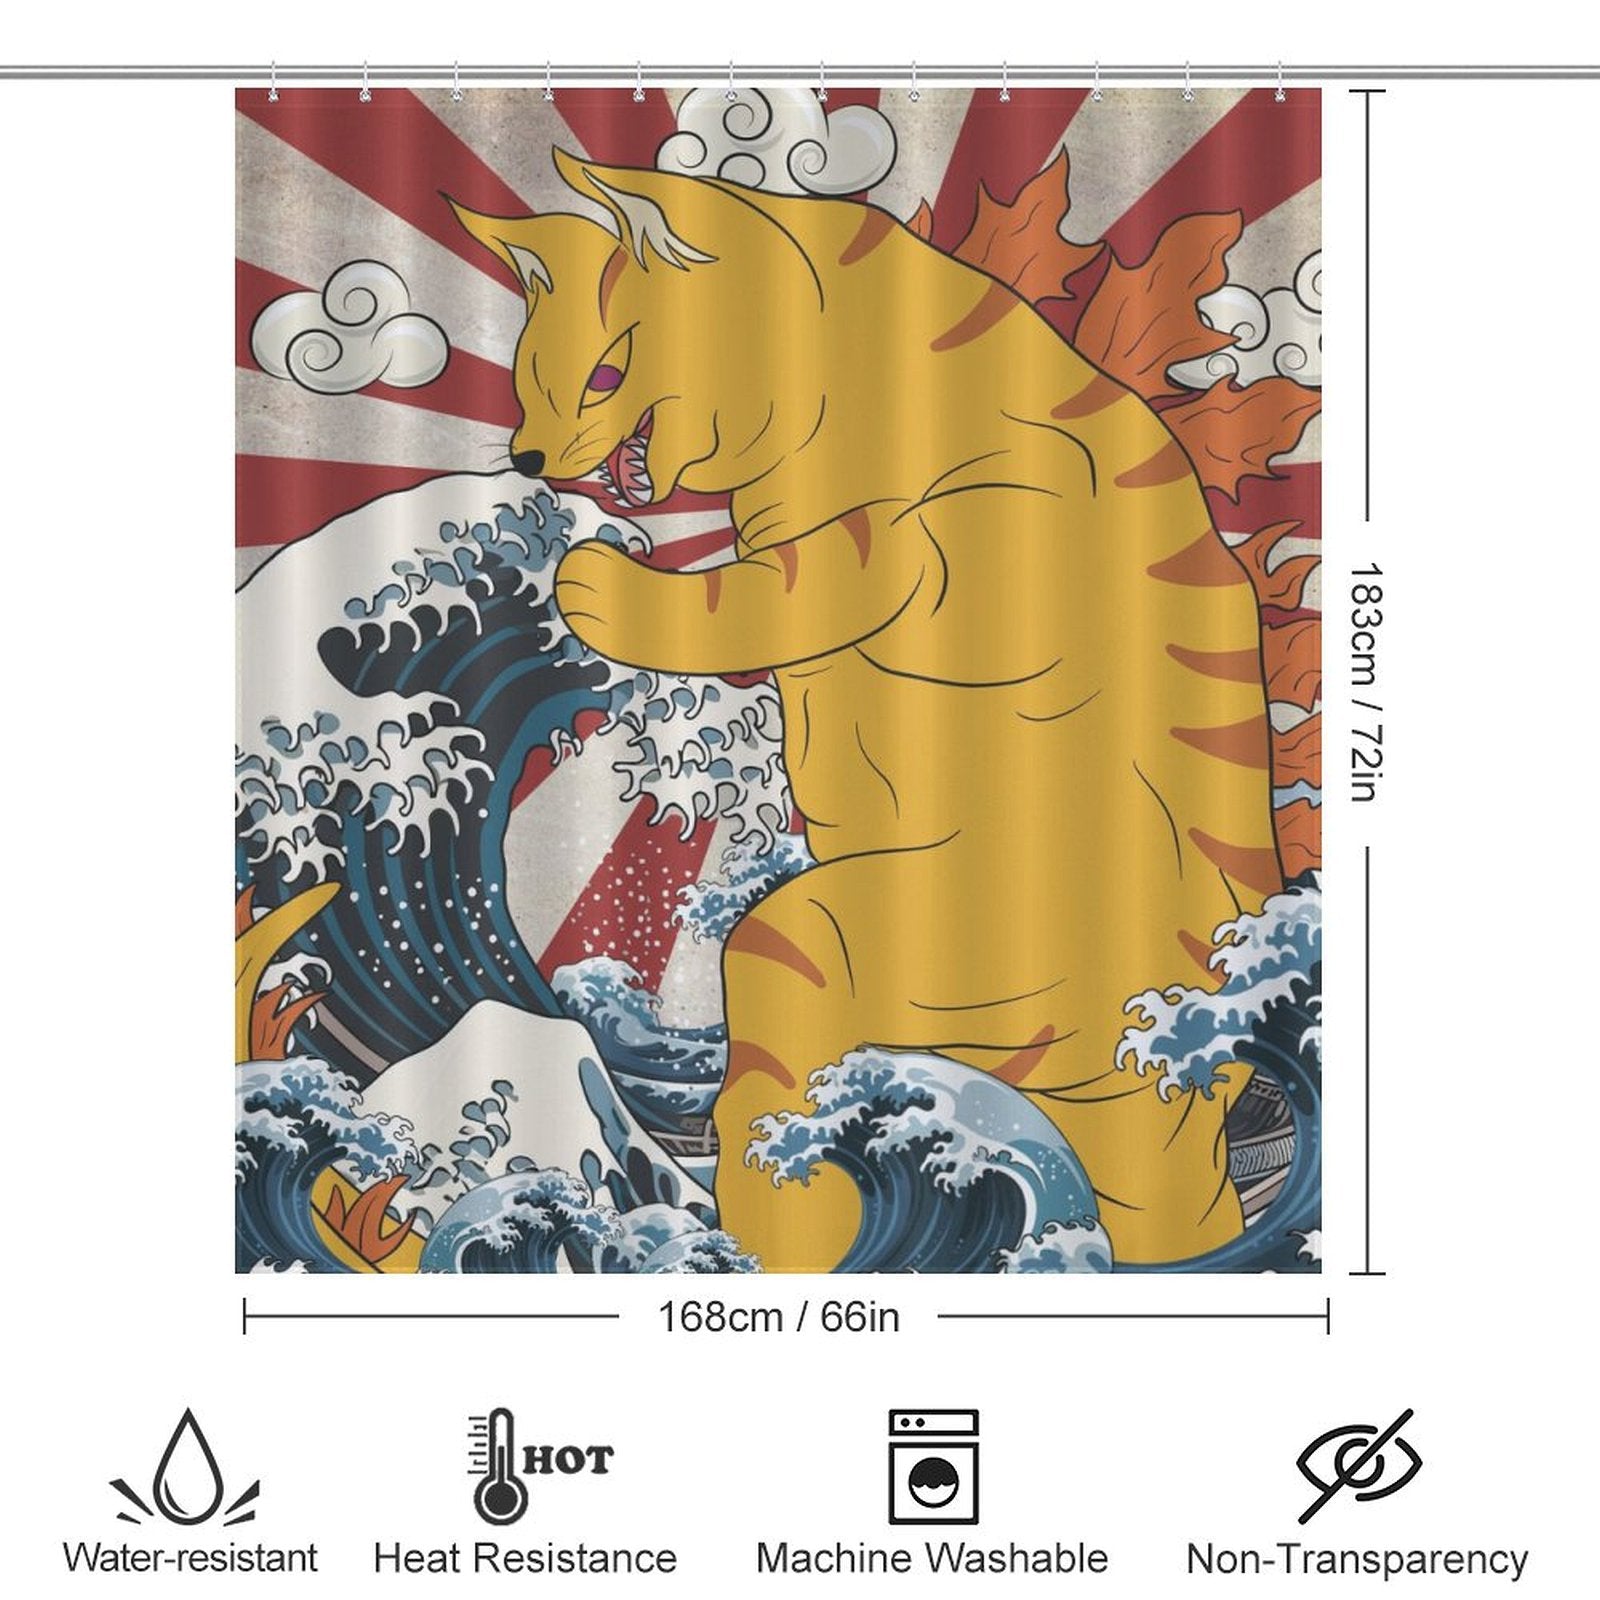 Illustration of a large, orange striped cat in a Japanese art style, appearing to battle ocean waves. The Funny Wave Monster Cat Shower Curtain-Cottoncat by Cotton Cat is 183 cm tall and 168 cm wide with icons indicating it is water-resistant, heat-resistant, machine washable, and not transparent—perfect bathroom decor with a unique design.